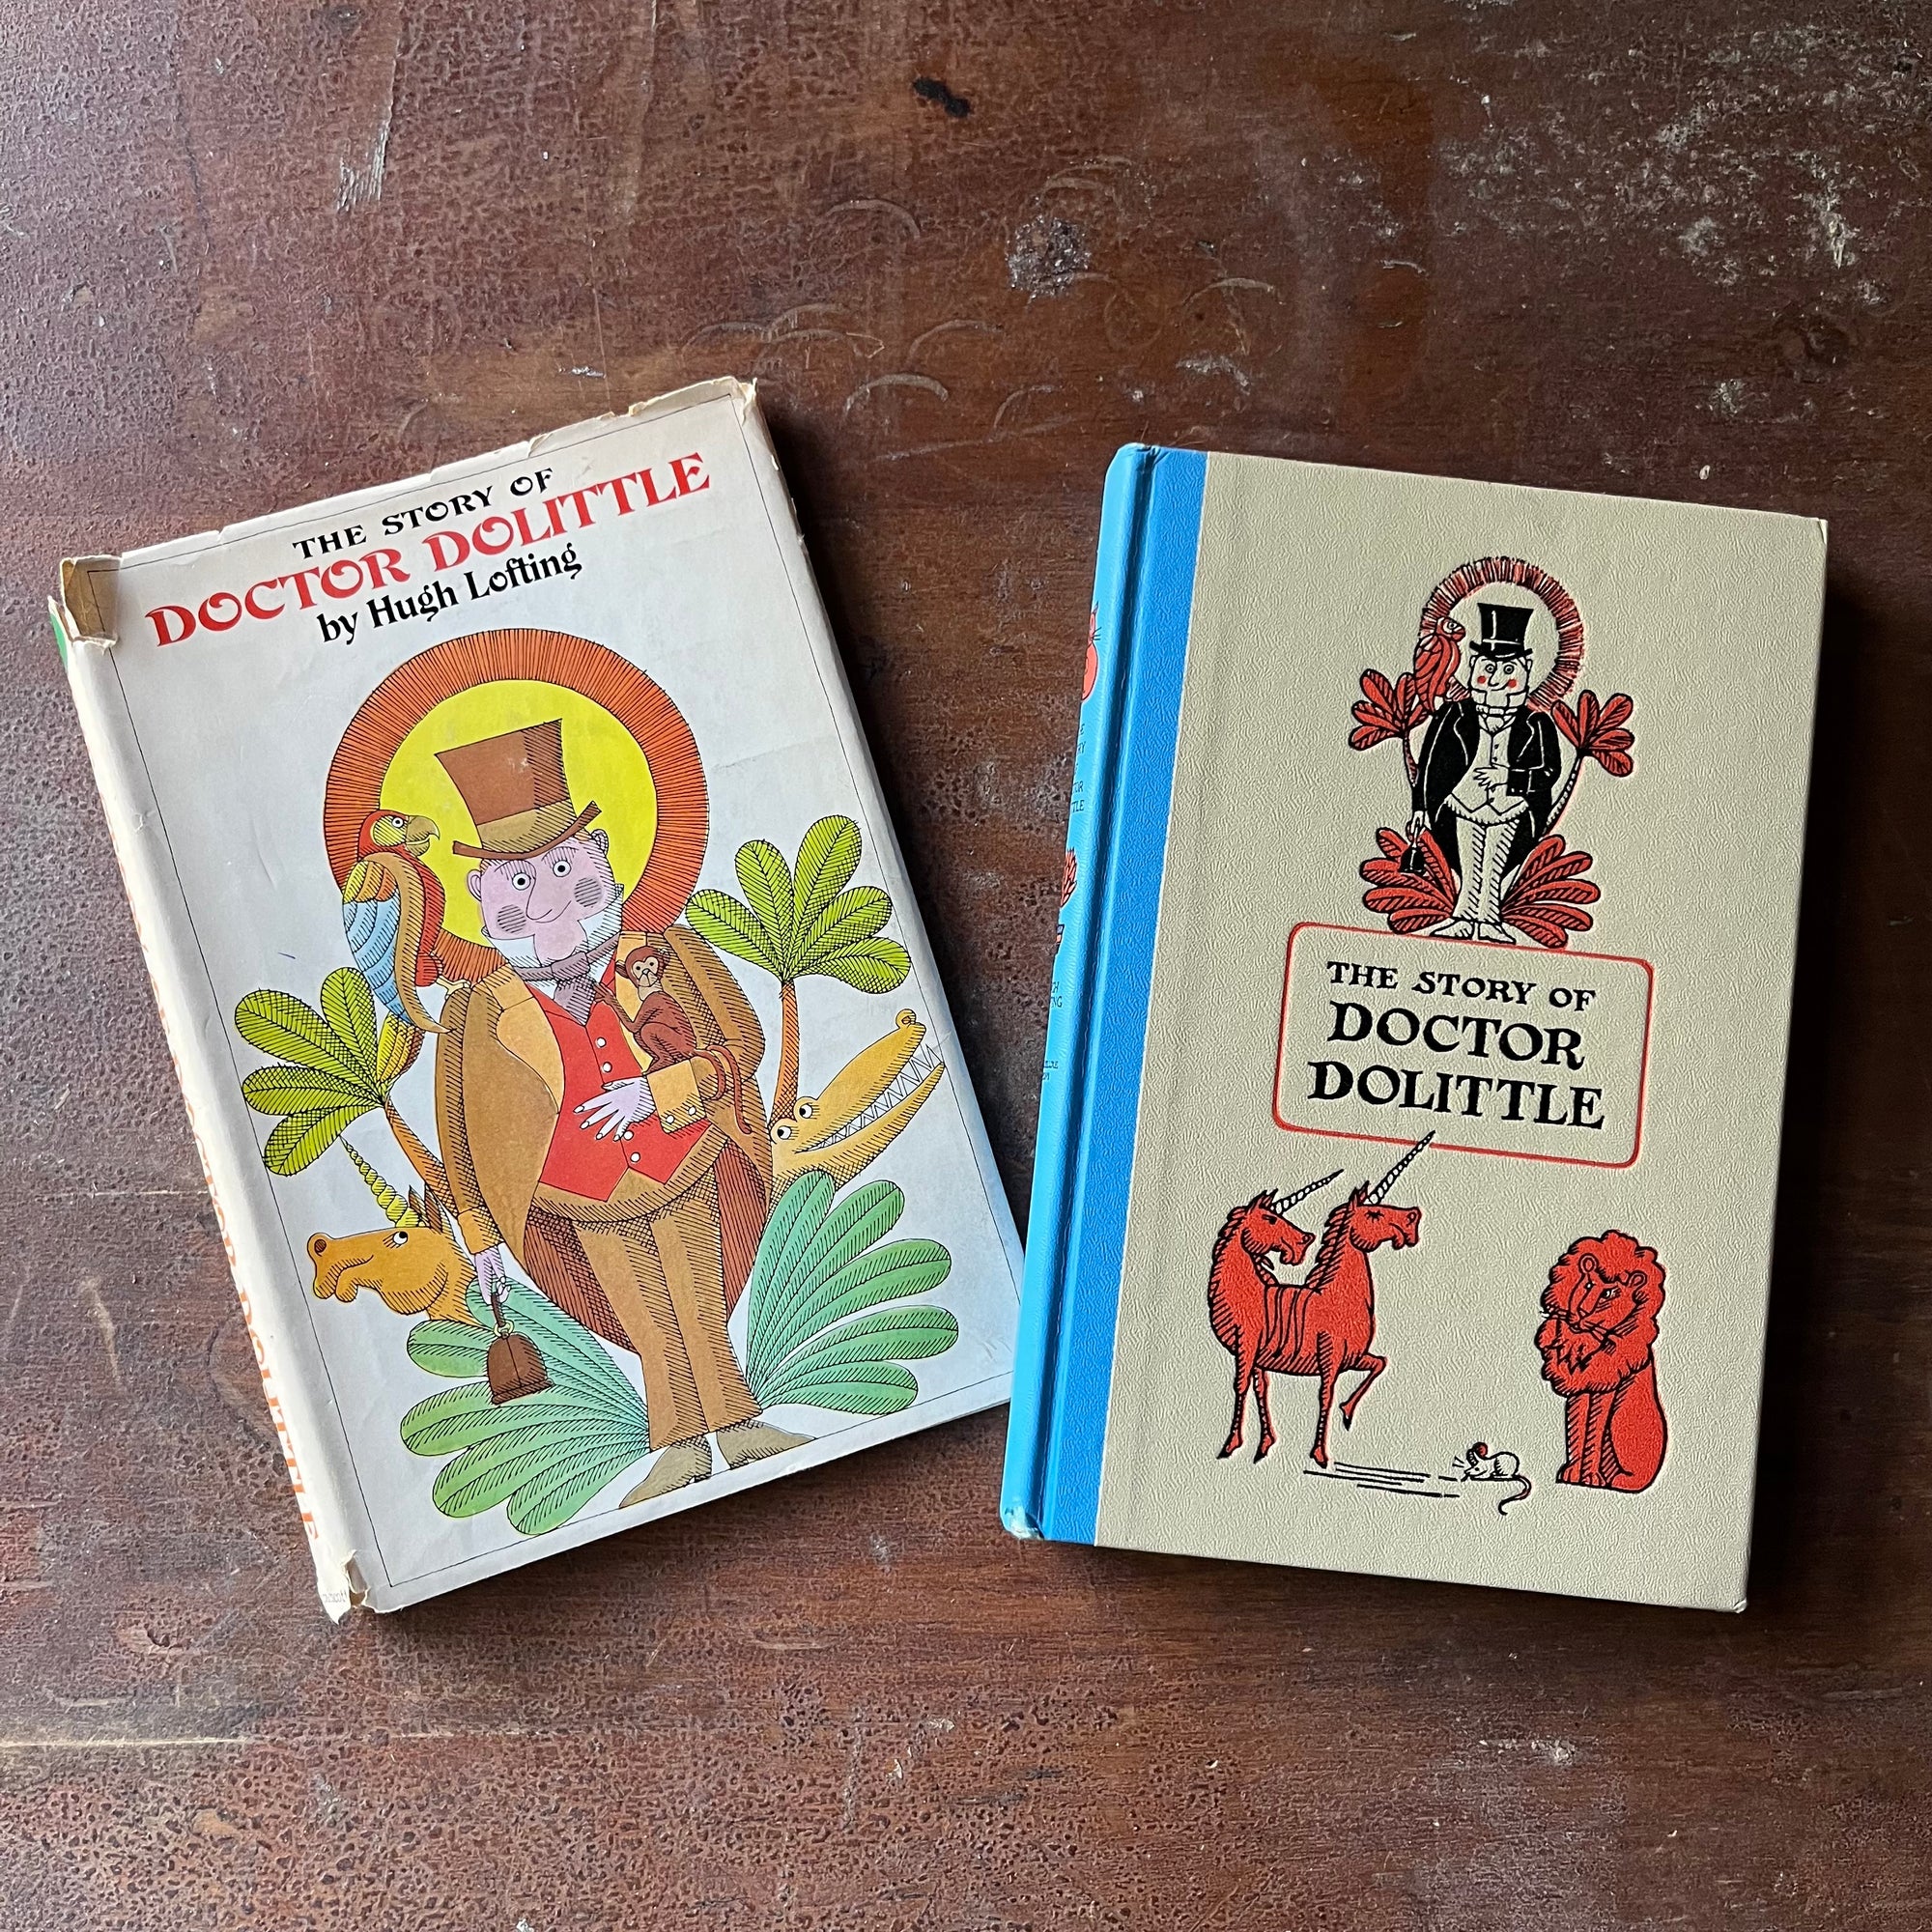 vintage children's chapter book, Junior Deluxe Editions Book - The Story of Doctor Dolittle written by Hugh Lofting with illustrations by Murray Tinkelman - view of the embossed front cover with Doctor Dolittle, a double headed unicorn & a lion on the cover